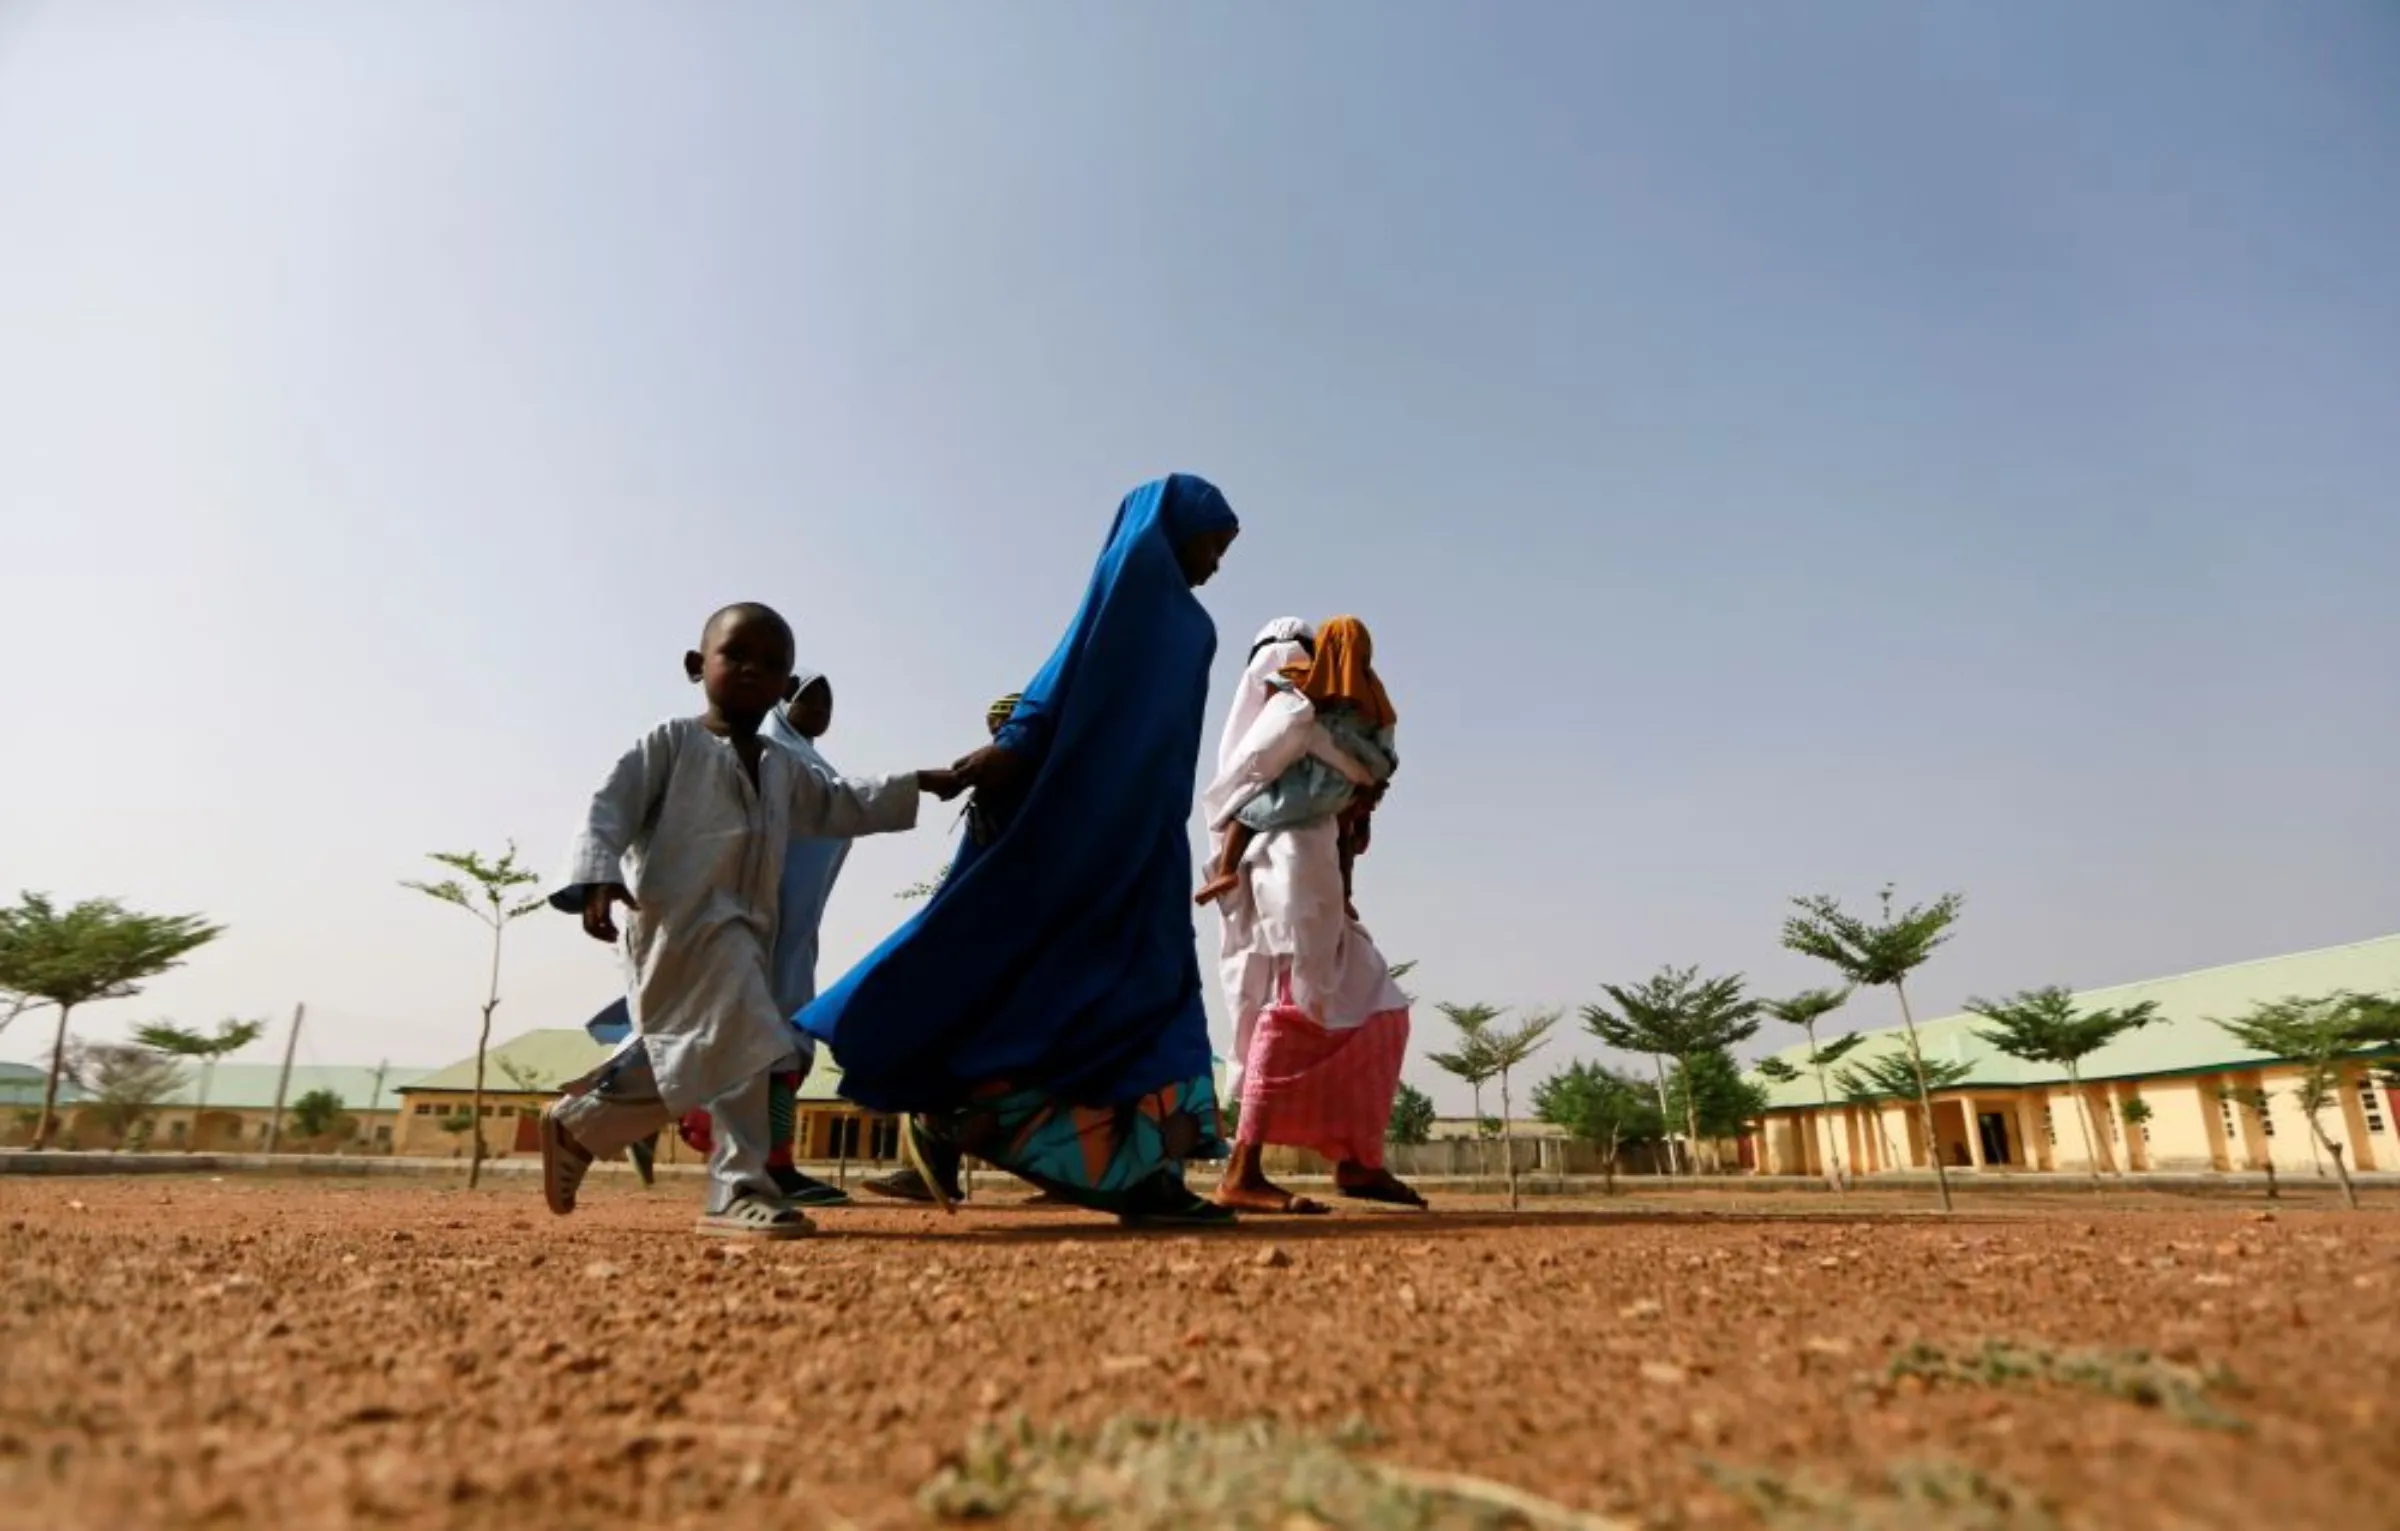 Mothers arrive at JSS Jangebe to collect their daughters following their release after they were kidnapped, in Jangebe, Zamfara, Nigeria March 3, 2021